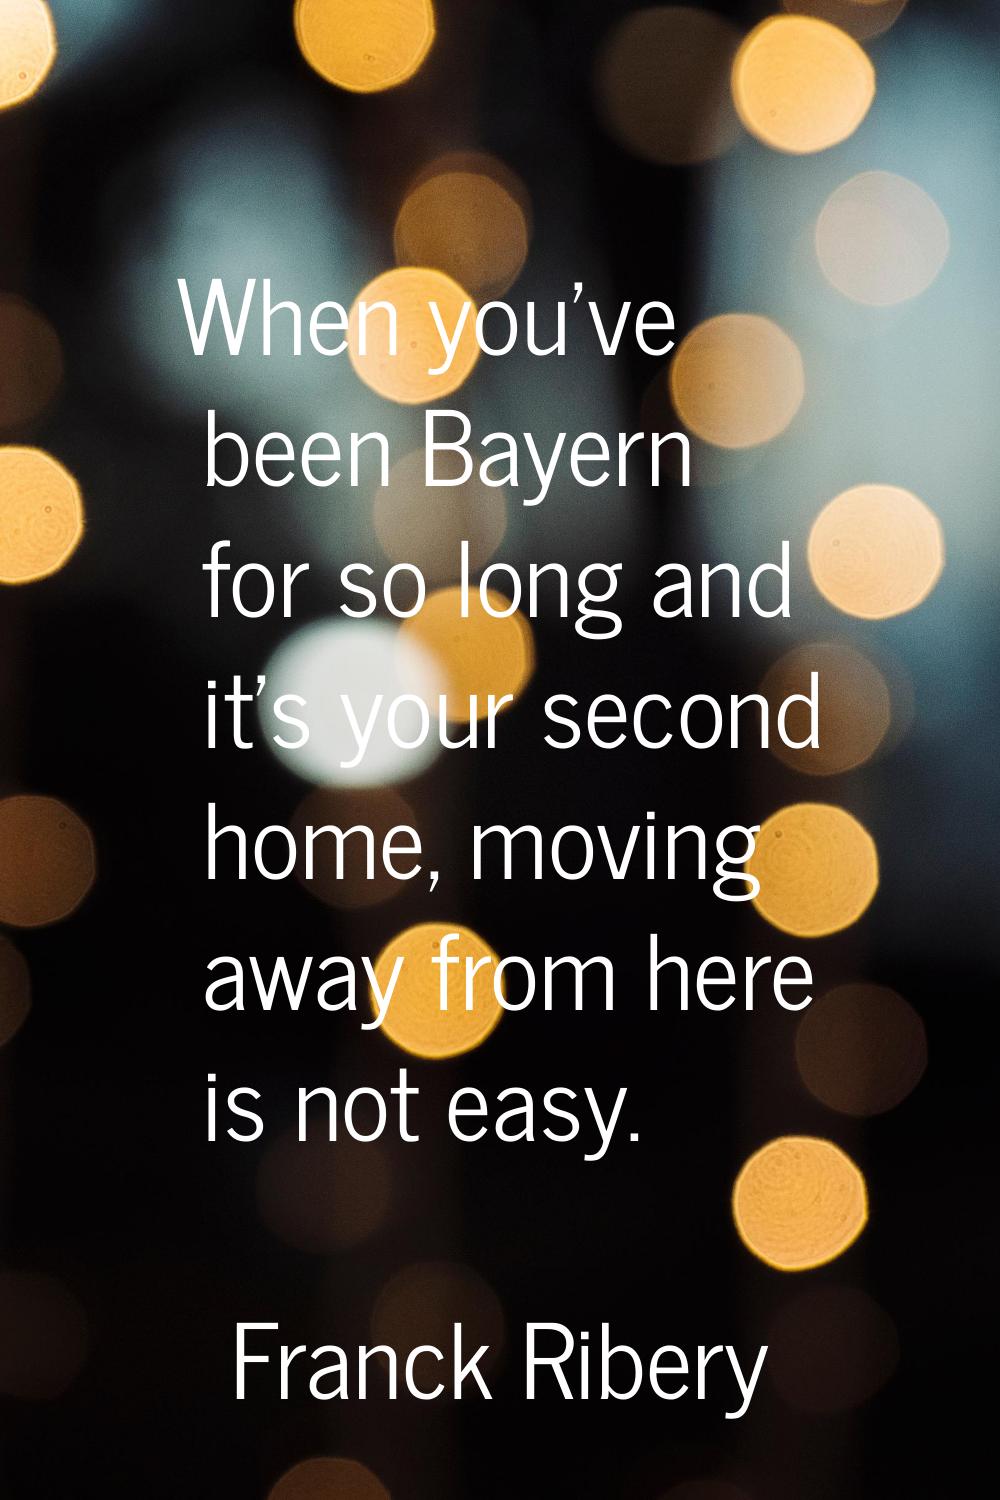 When you've been Bayern for so long and it's your second home, moving away from here is not easy.